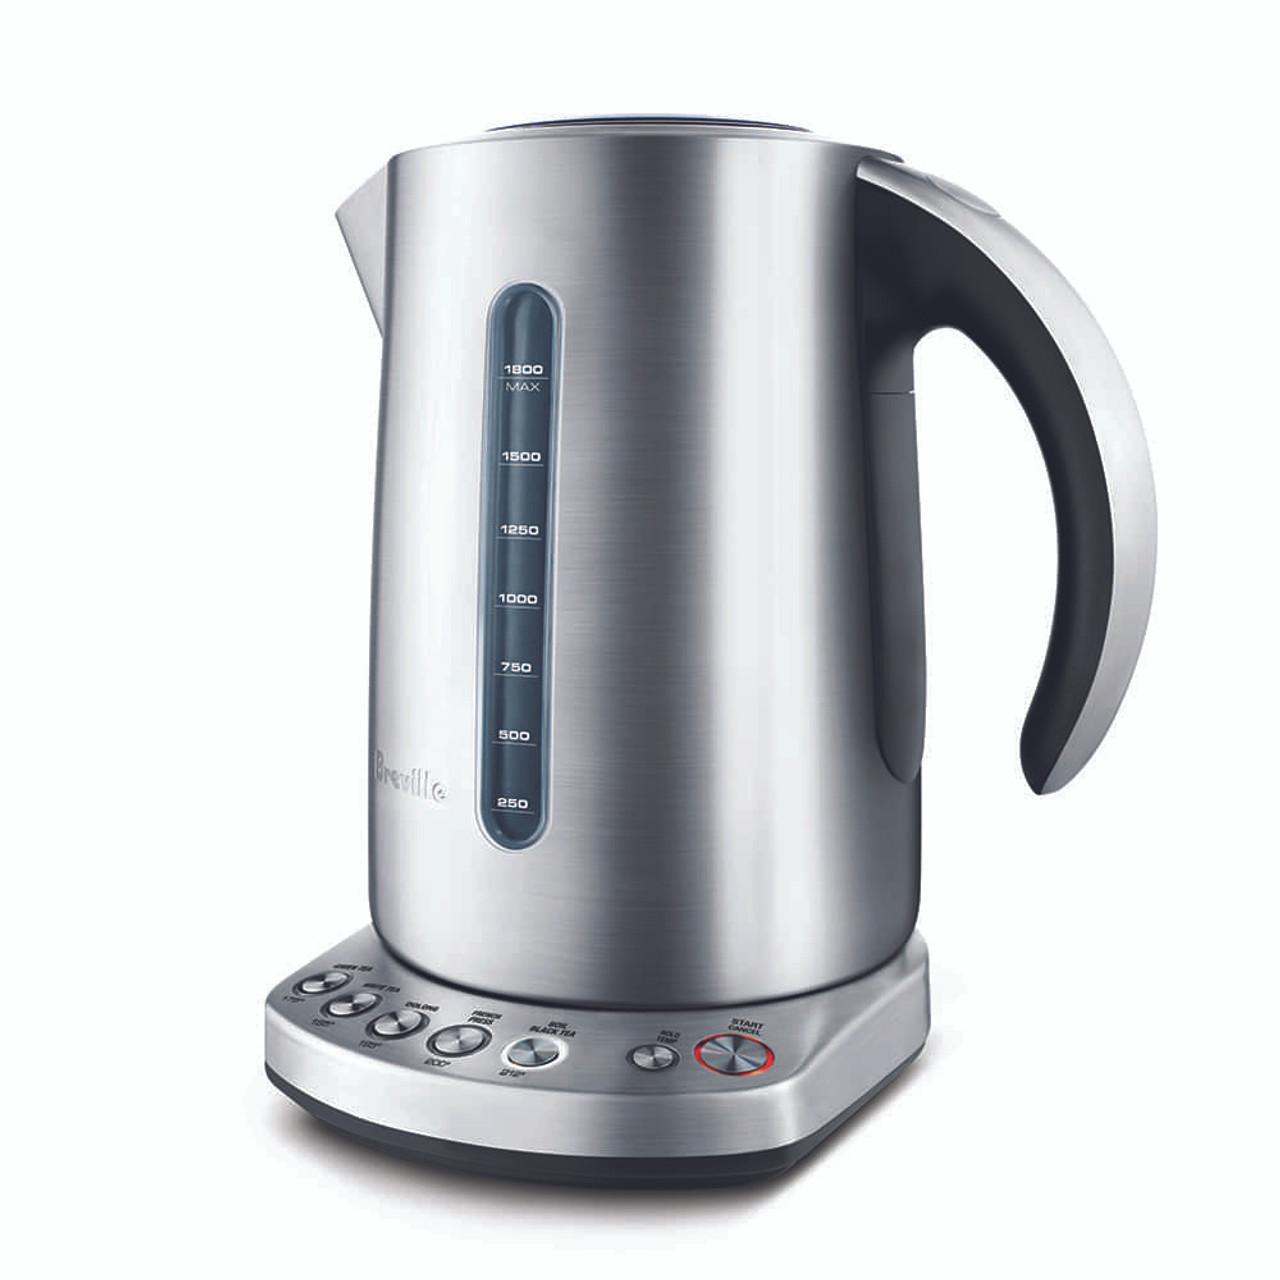 Breville Ikon Stainless-Steel Electric Kettle